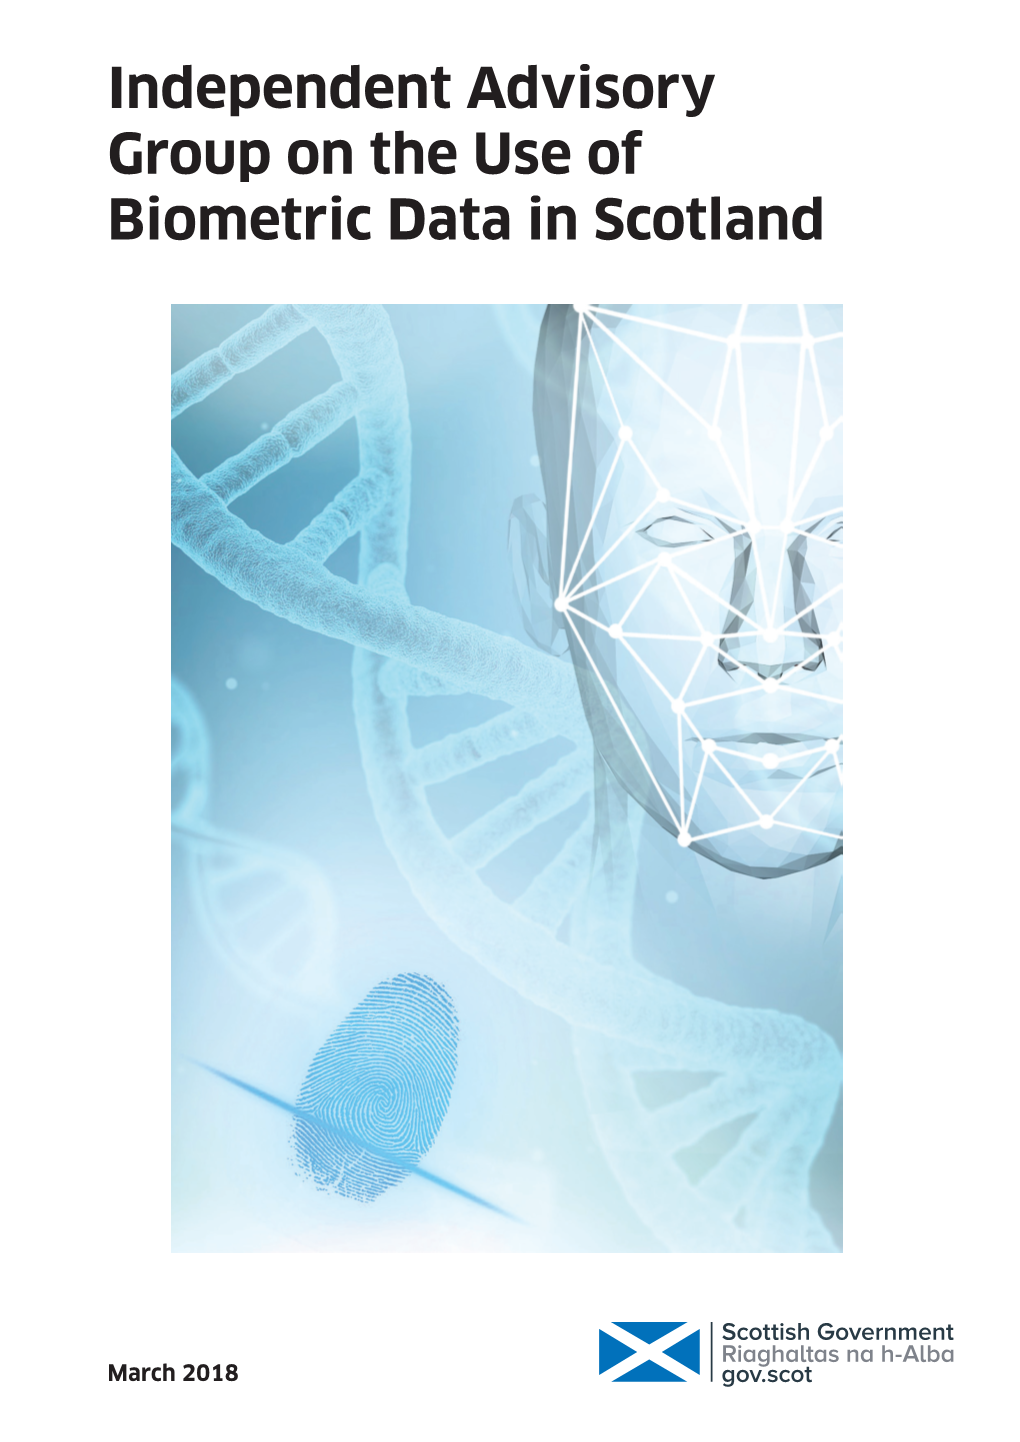 Independent Advisory Group on the Use of Biometric Data in Scotland